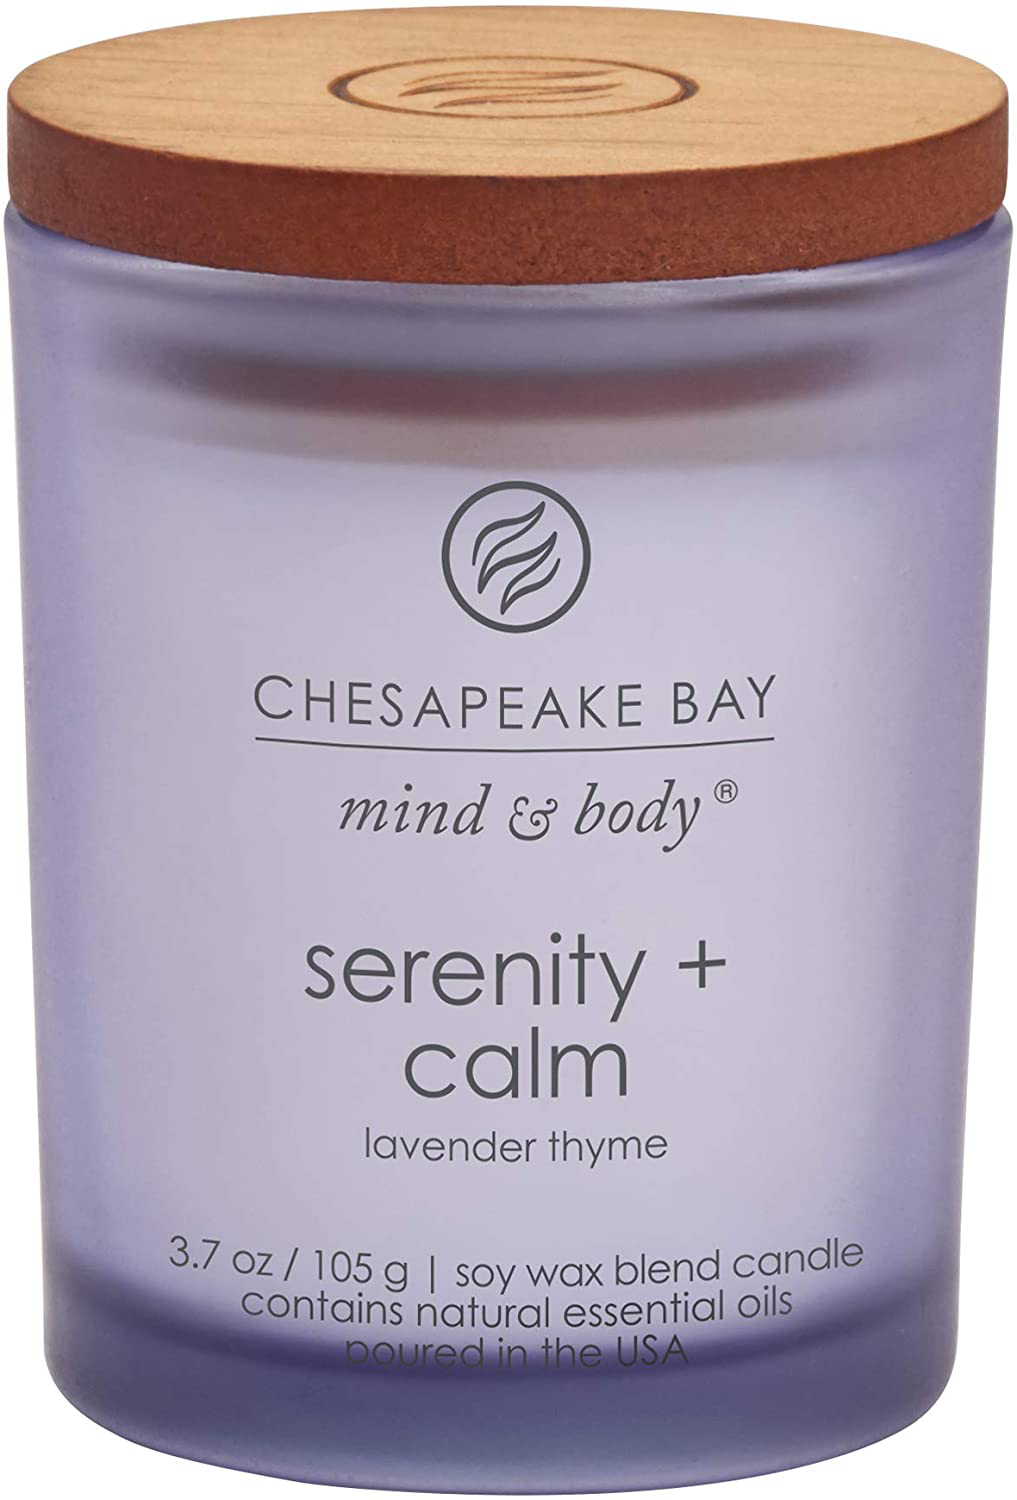 Chesapeake Bay Candle Scented Candle, Serenity + Calm (Lavender Thyme), Coffee Table